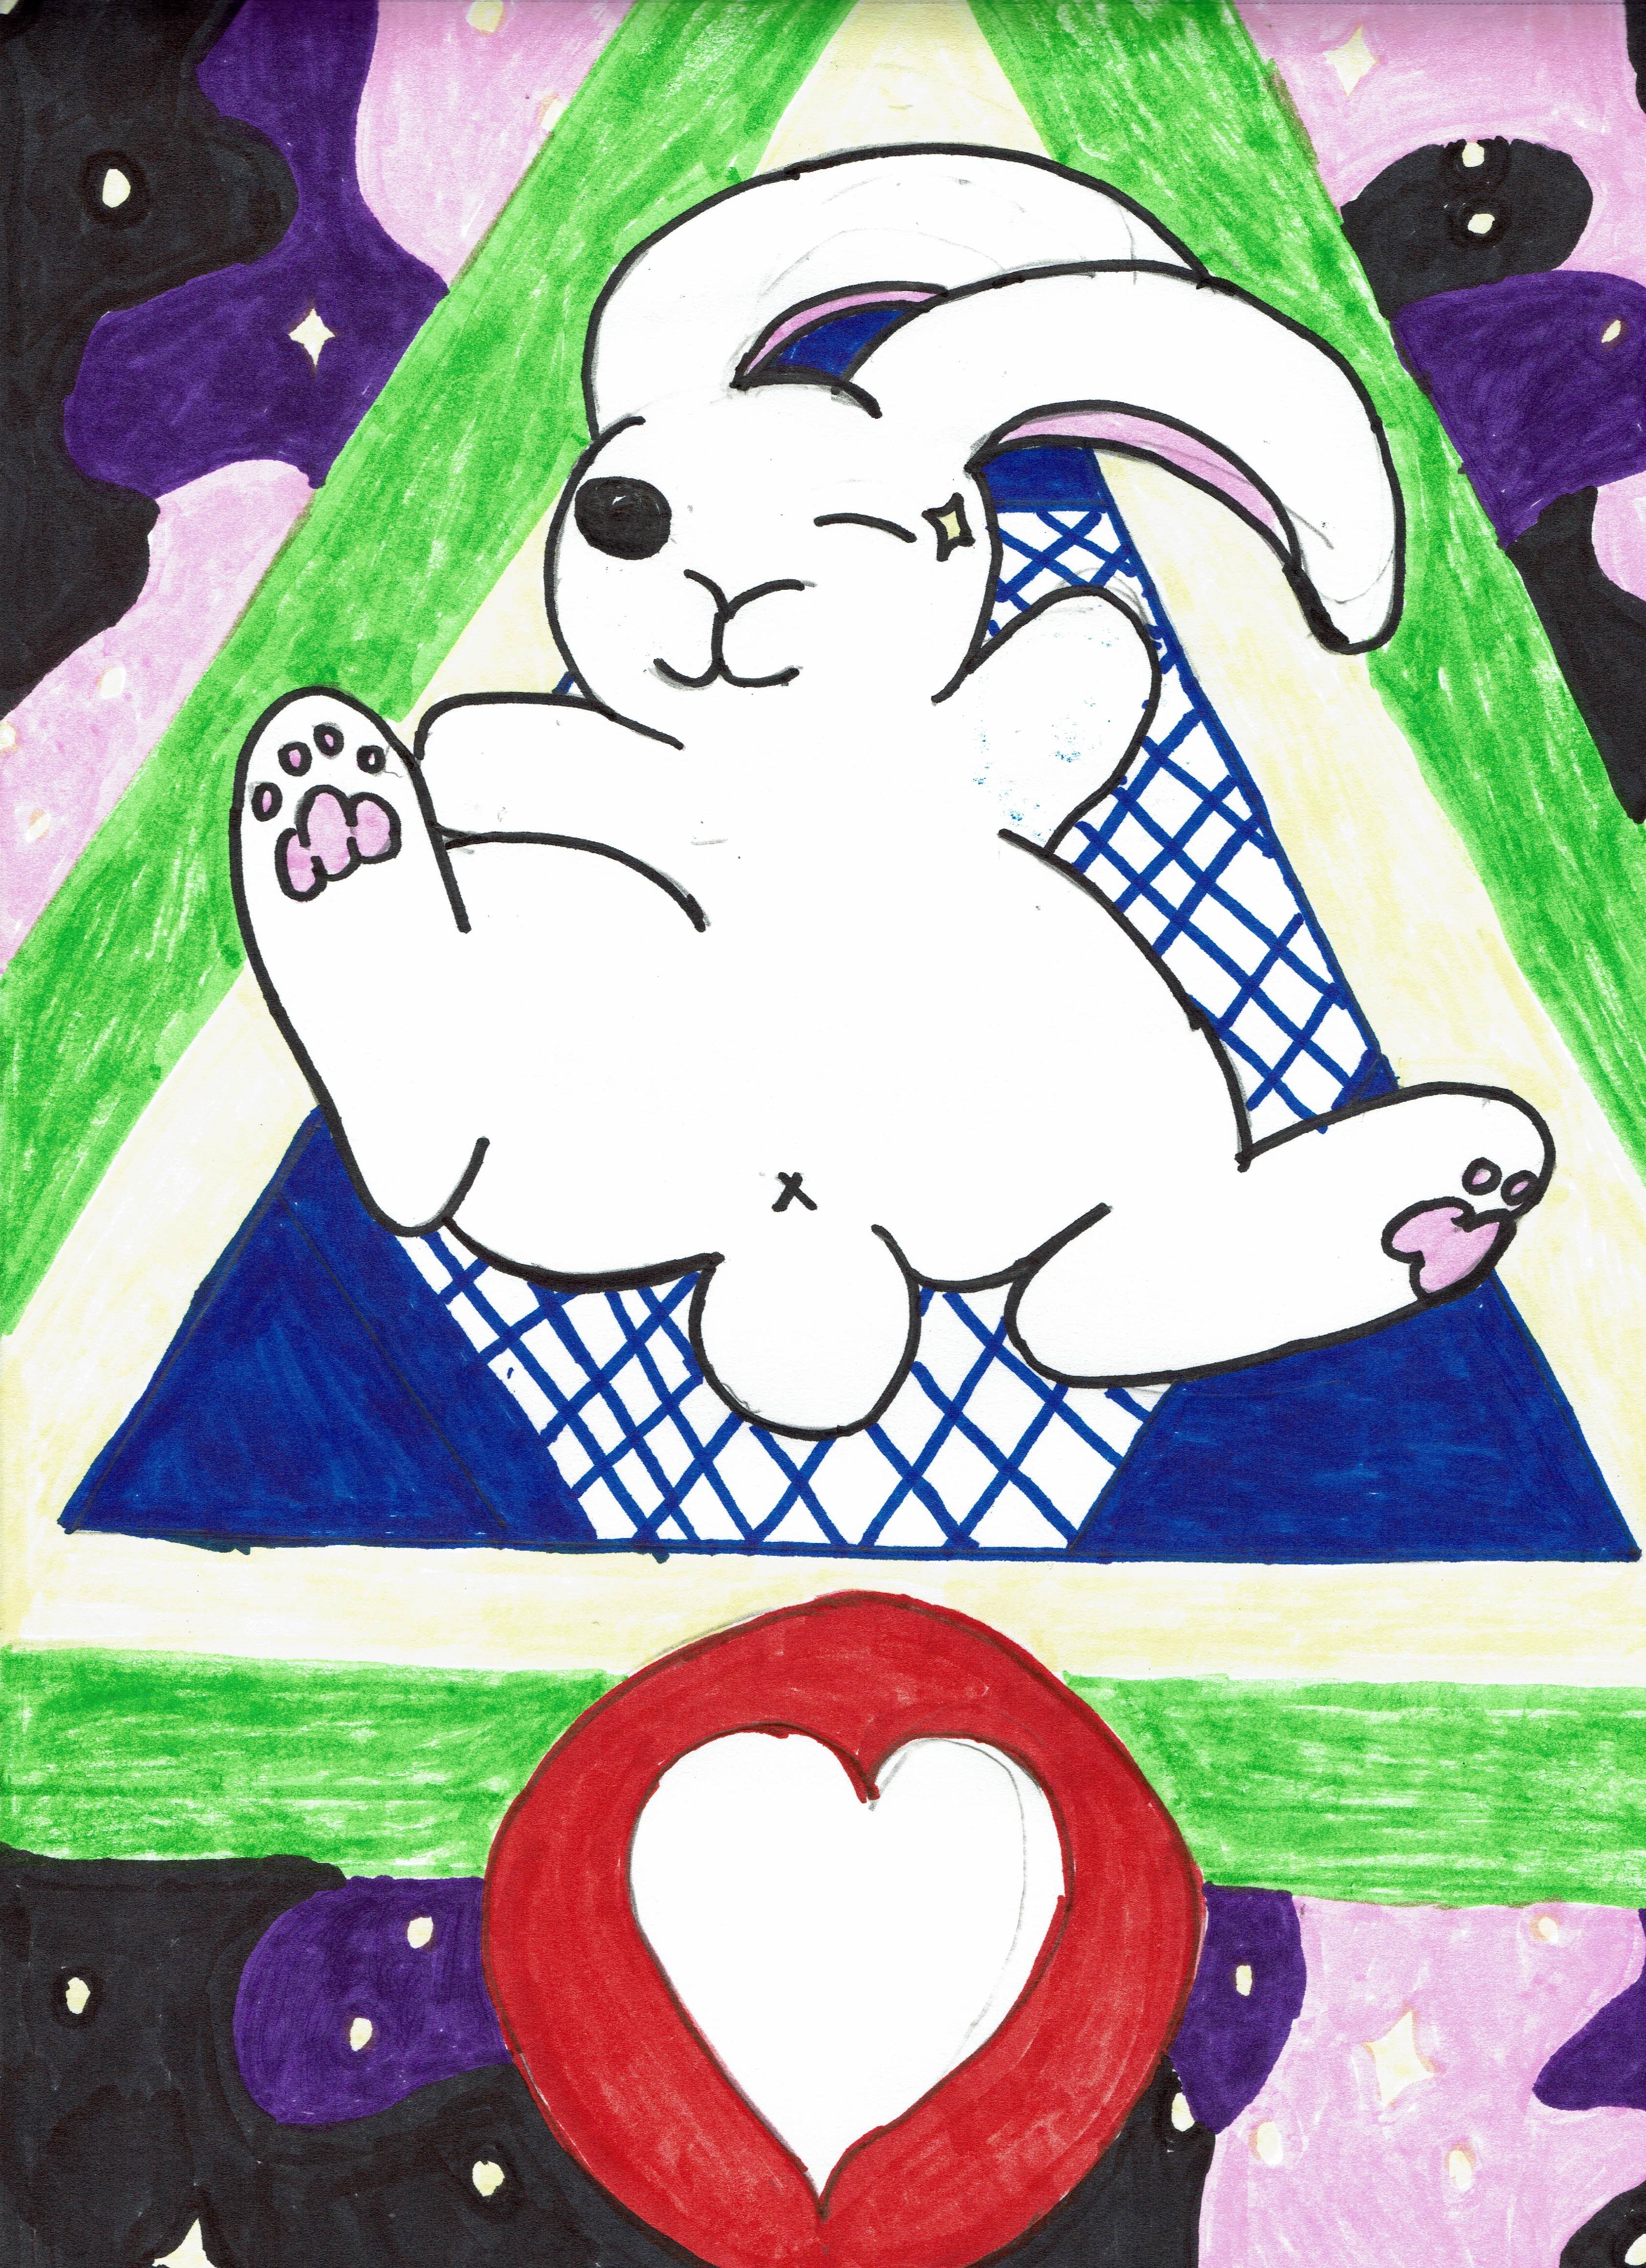 A marker drawing inspired by the music video for Pogo by Area21